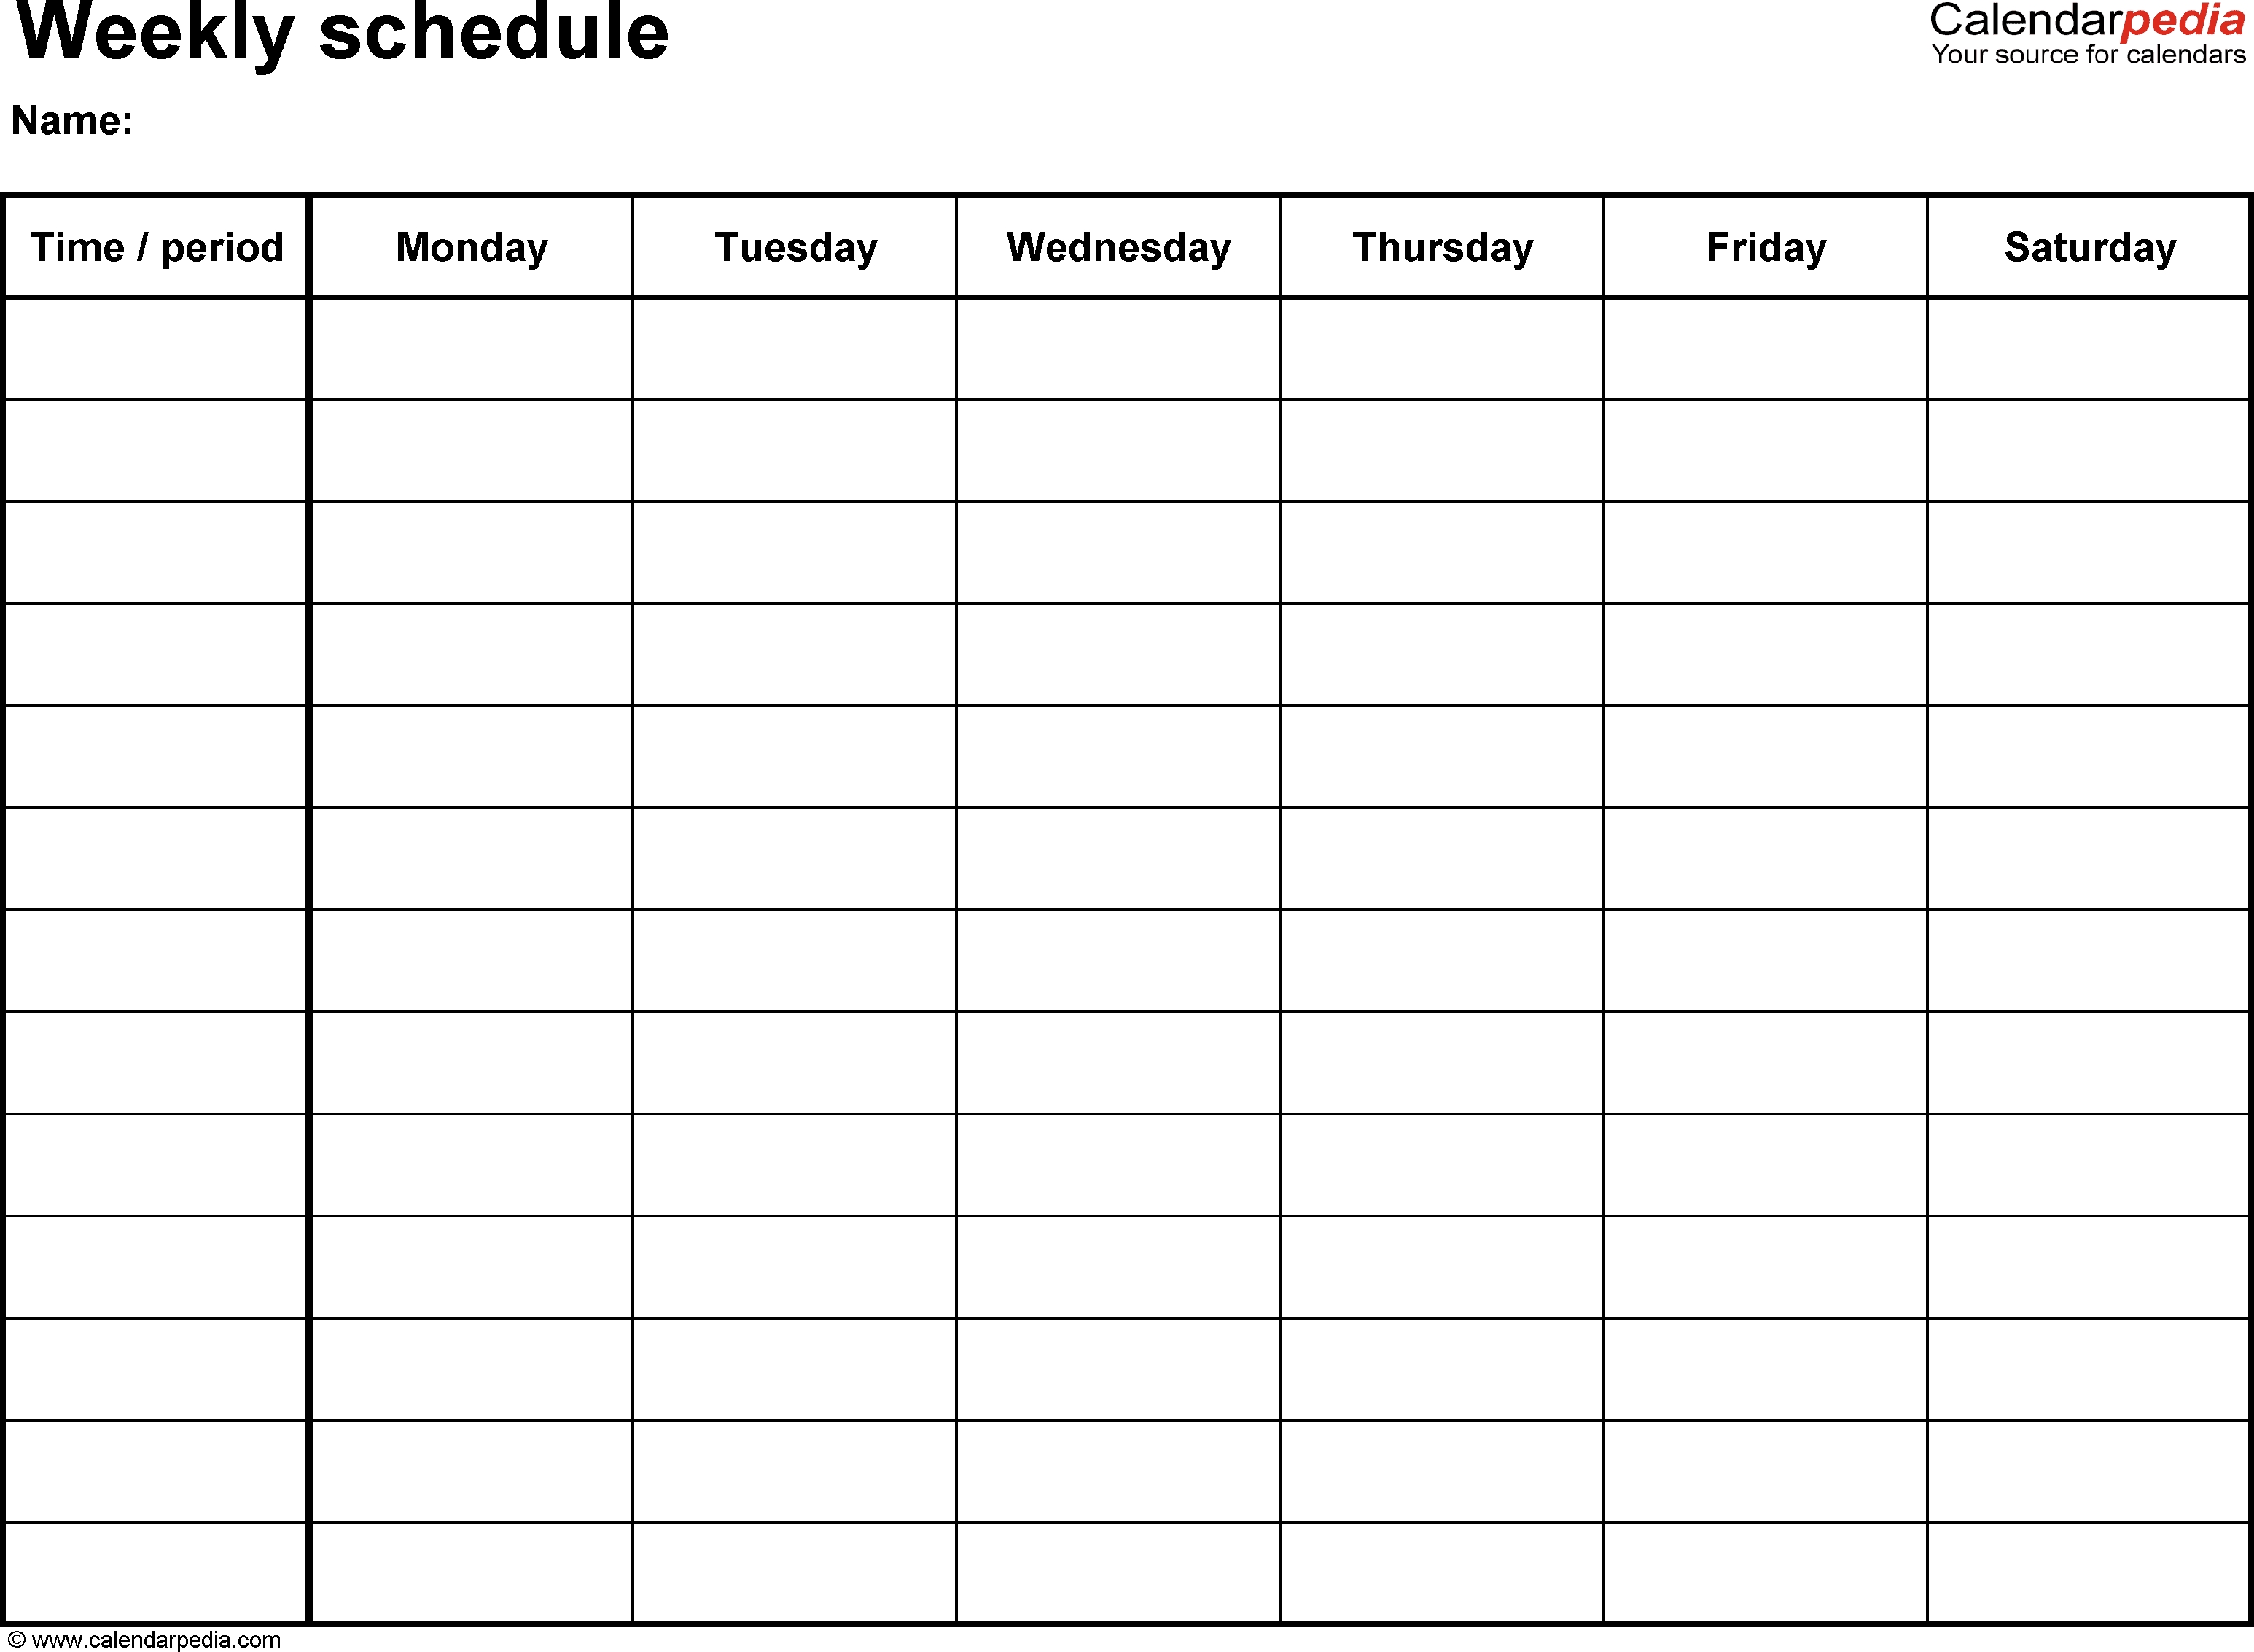 Free Weekly Schedule Templates For Word - 18 Templates pertaining to Fill In Blank Calendar Templates